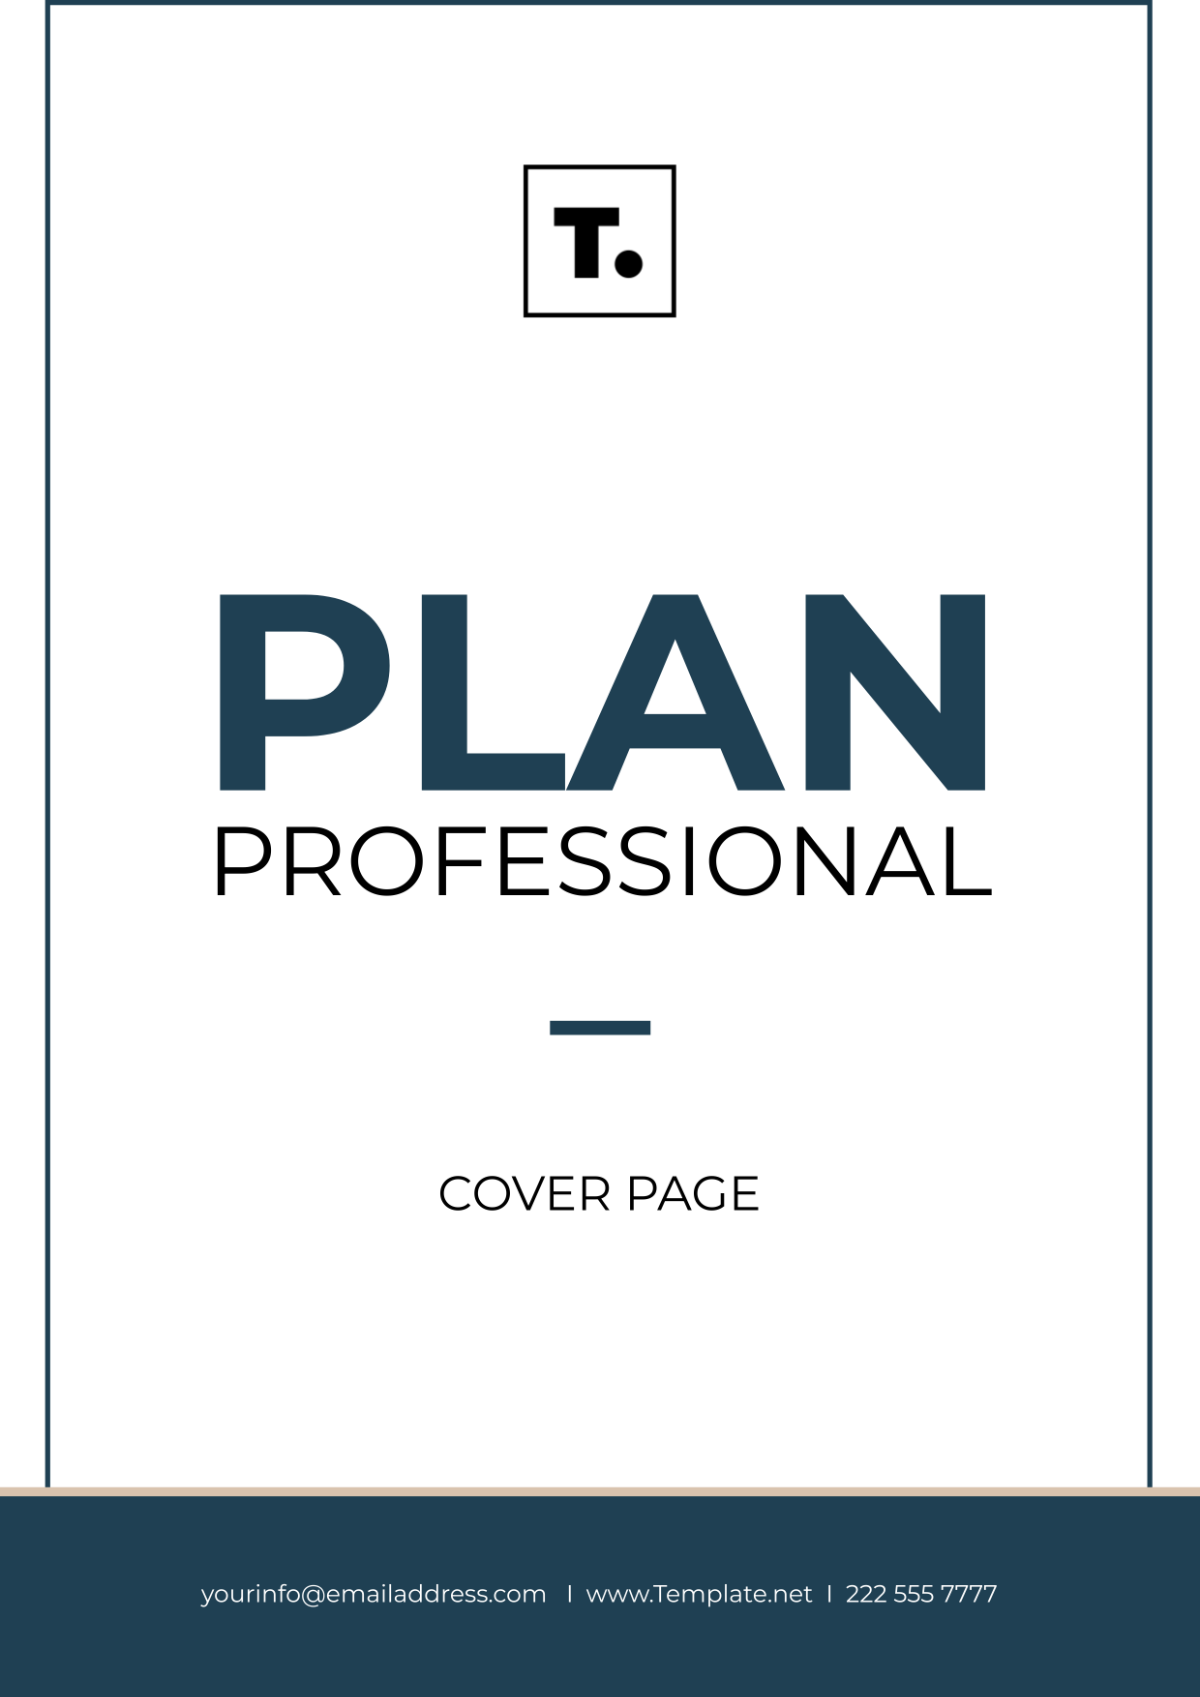 Plan Professional Cover Page Template